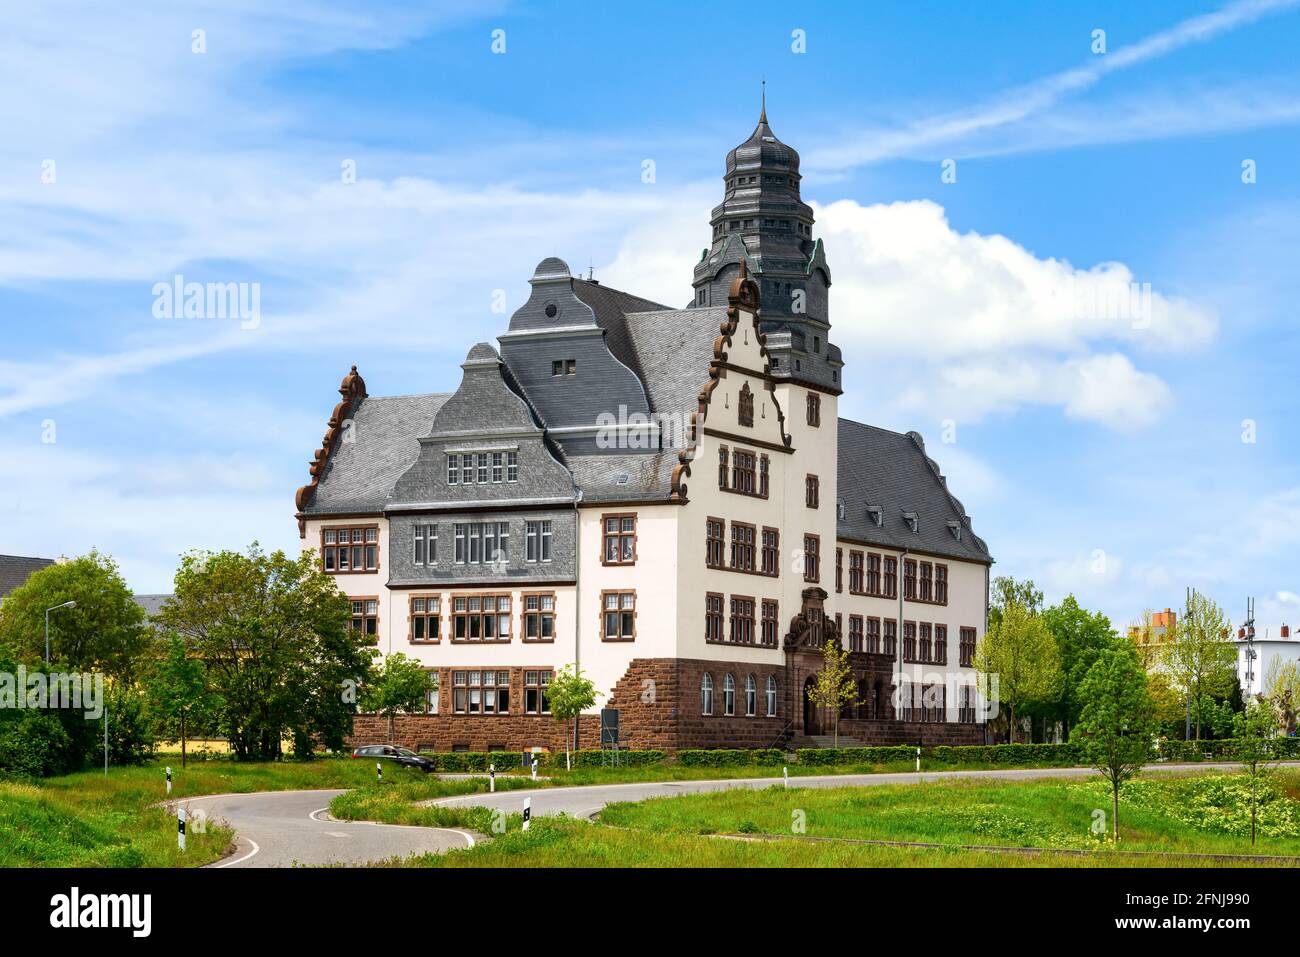 Ernst-Ludwig-Schule in Worms, Germany Stock Photo